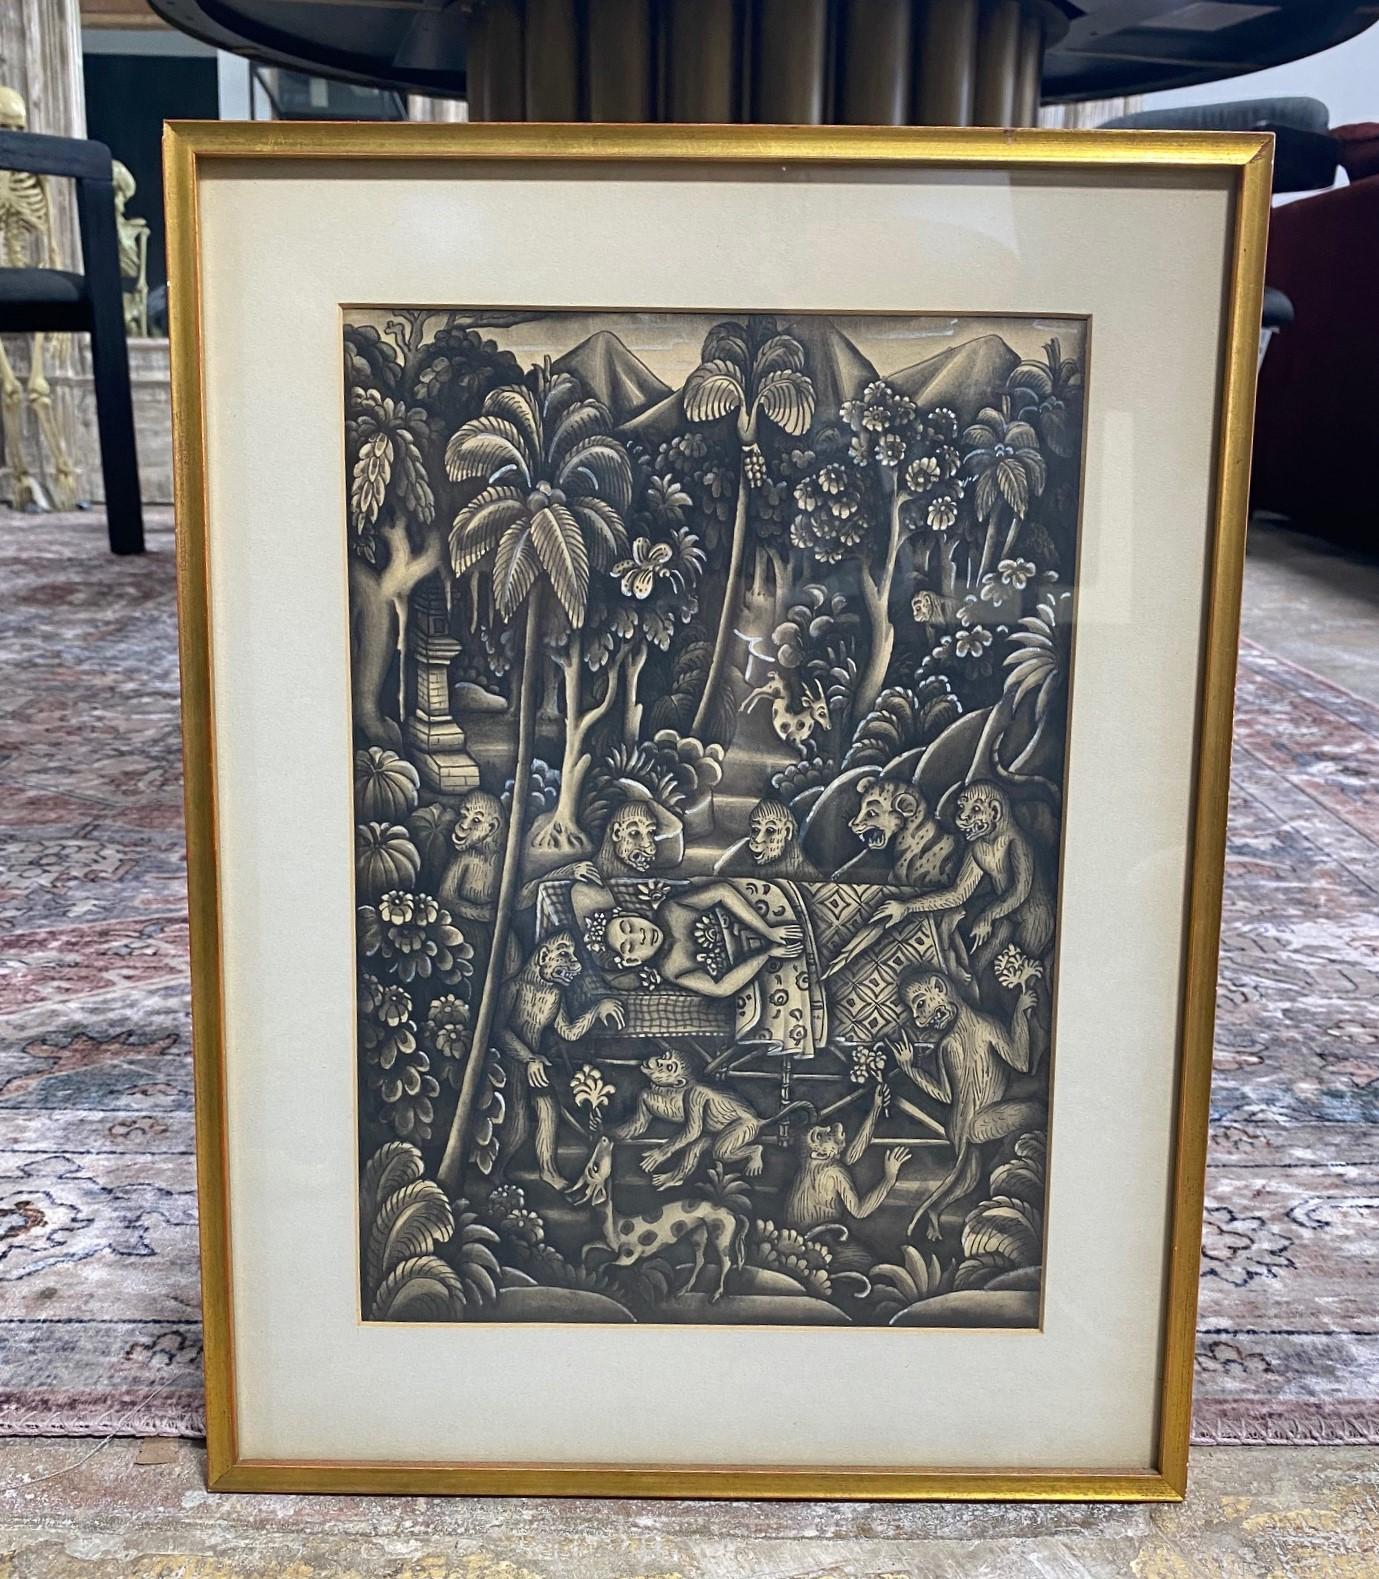 A gorgeous and whimsical original Indonesian/Balinese monochrome black, grey, and white painting. The work features a beautiful scene of a woman being carried through the jungle by various wild and indigenous animals. This is either some grand